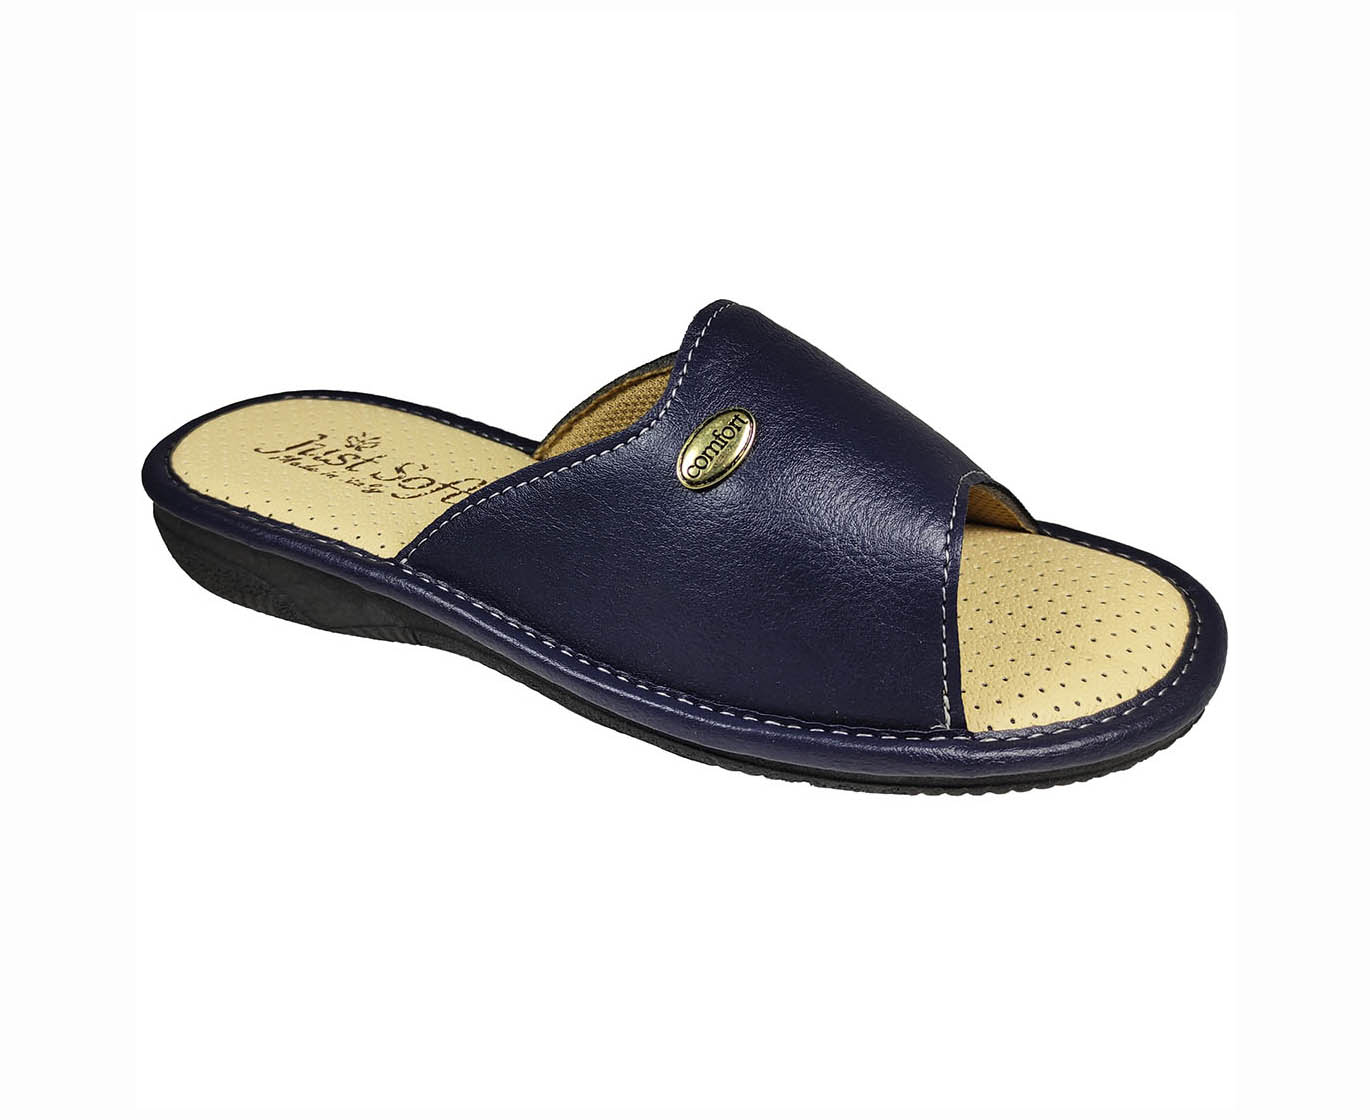 Italian Anatomical slippers Just Soft 1610 Blue